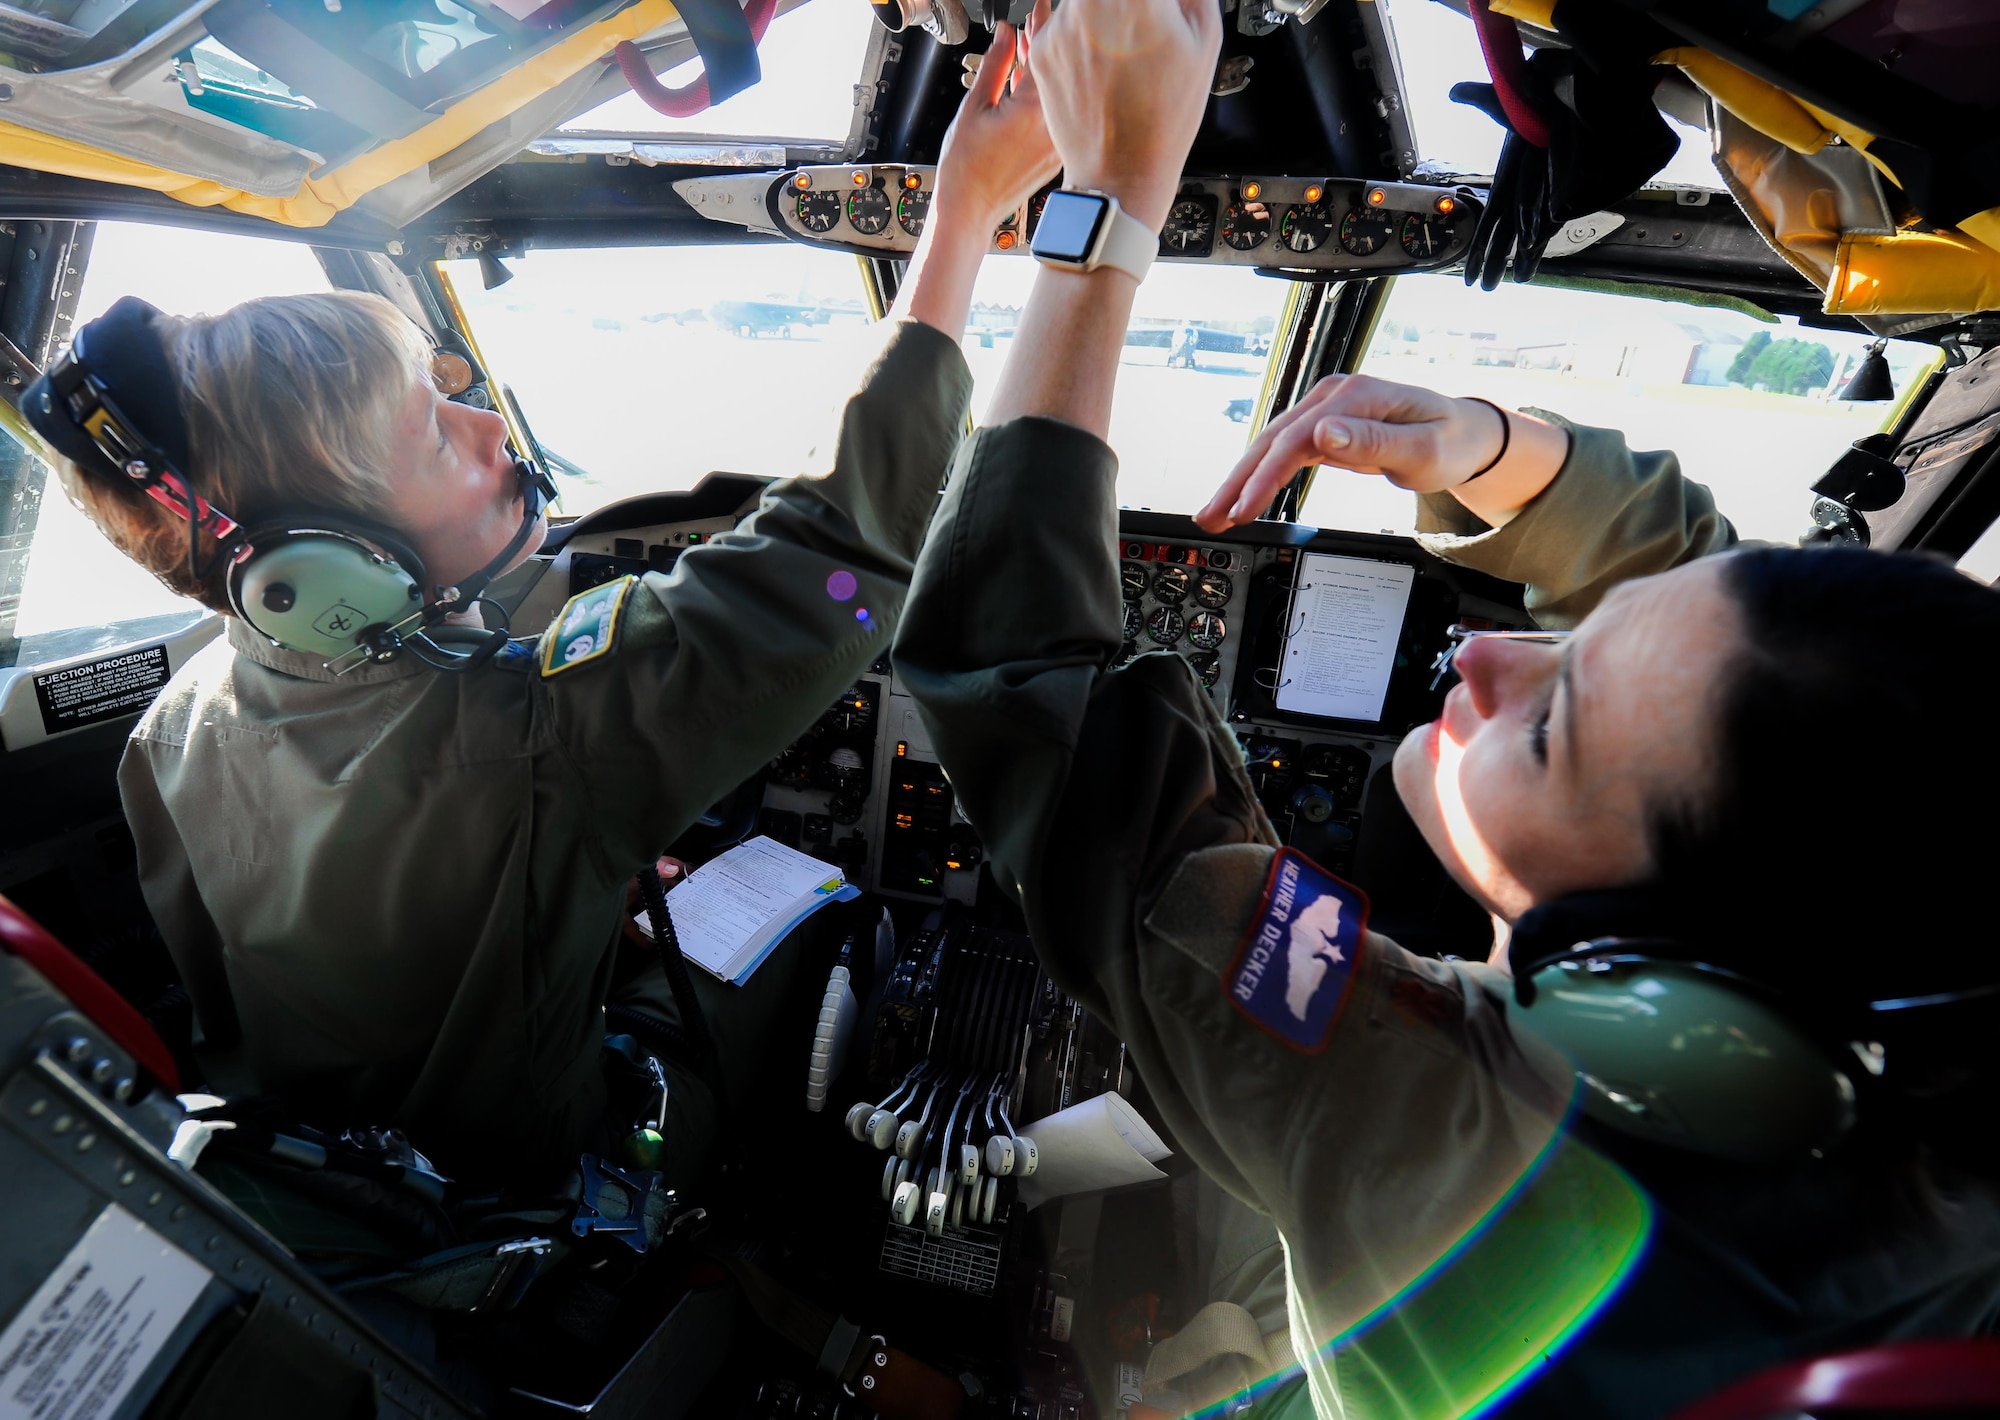 Col. Kristin Goodwin, the 2nd Bomb Wing commander, and Maj. Heather Decker, a 93rd Bomb Squadron instructor pilot, go through their preflight checklist prior to takeoff at Barksdale Air Force Base, La., March 22, 2016. (U.S. Air Force photo/2nd LT. Jessica Adams)